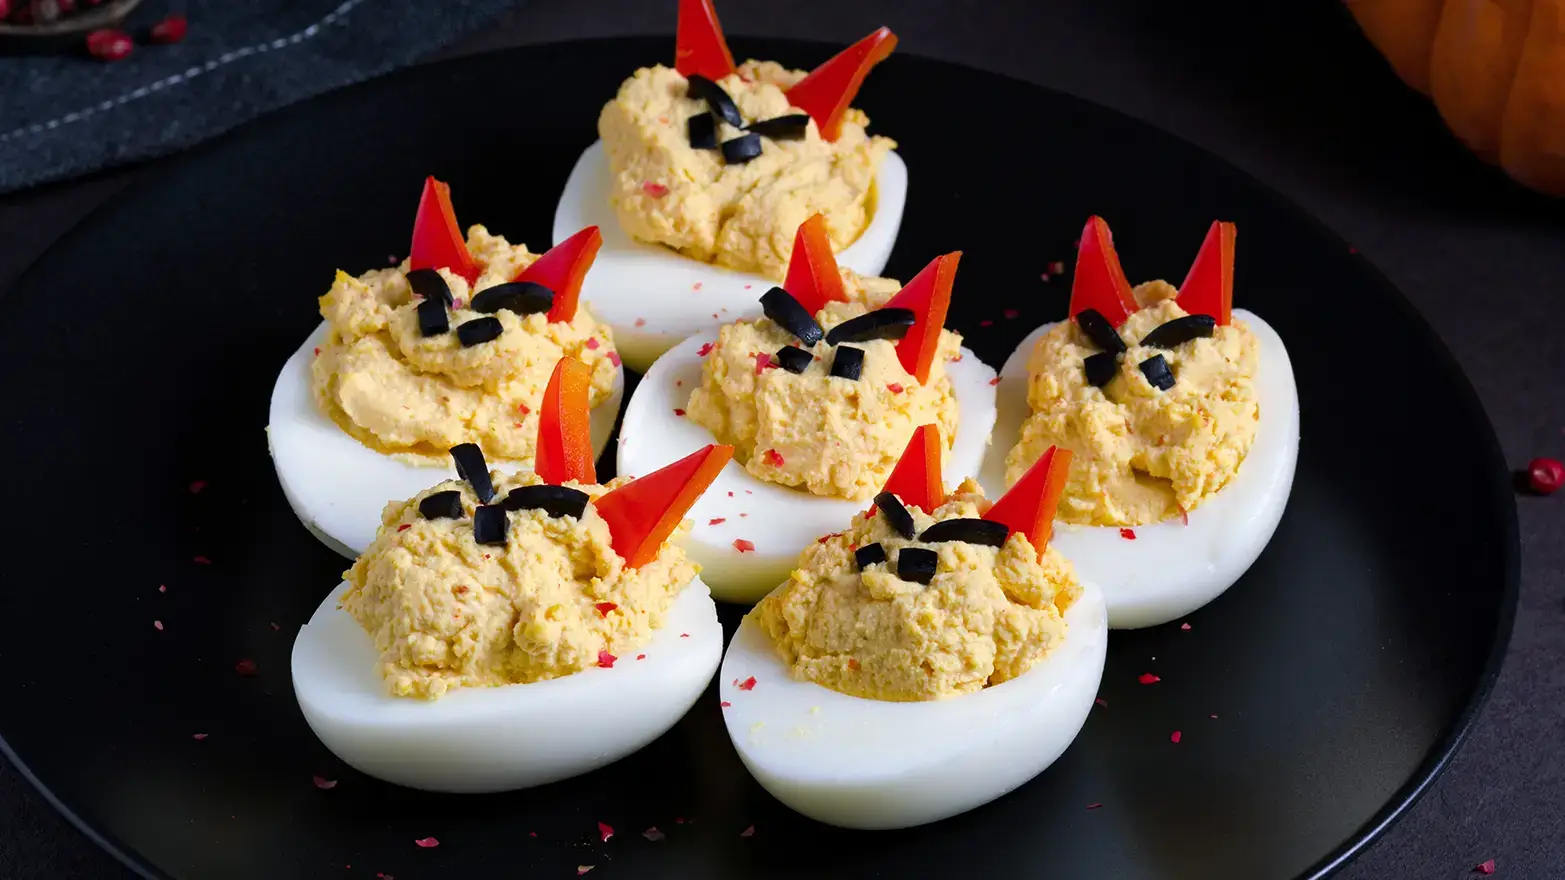 Deviled eggs with angry faces and bell pepper devil horns